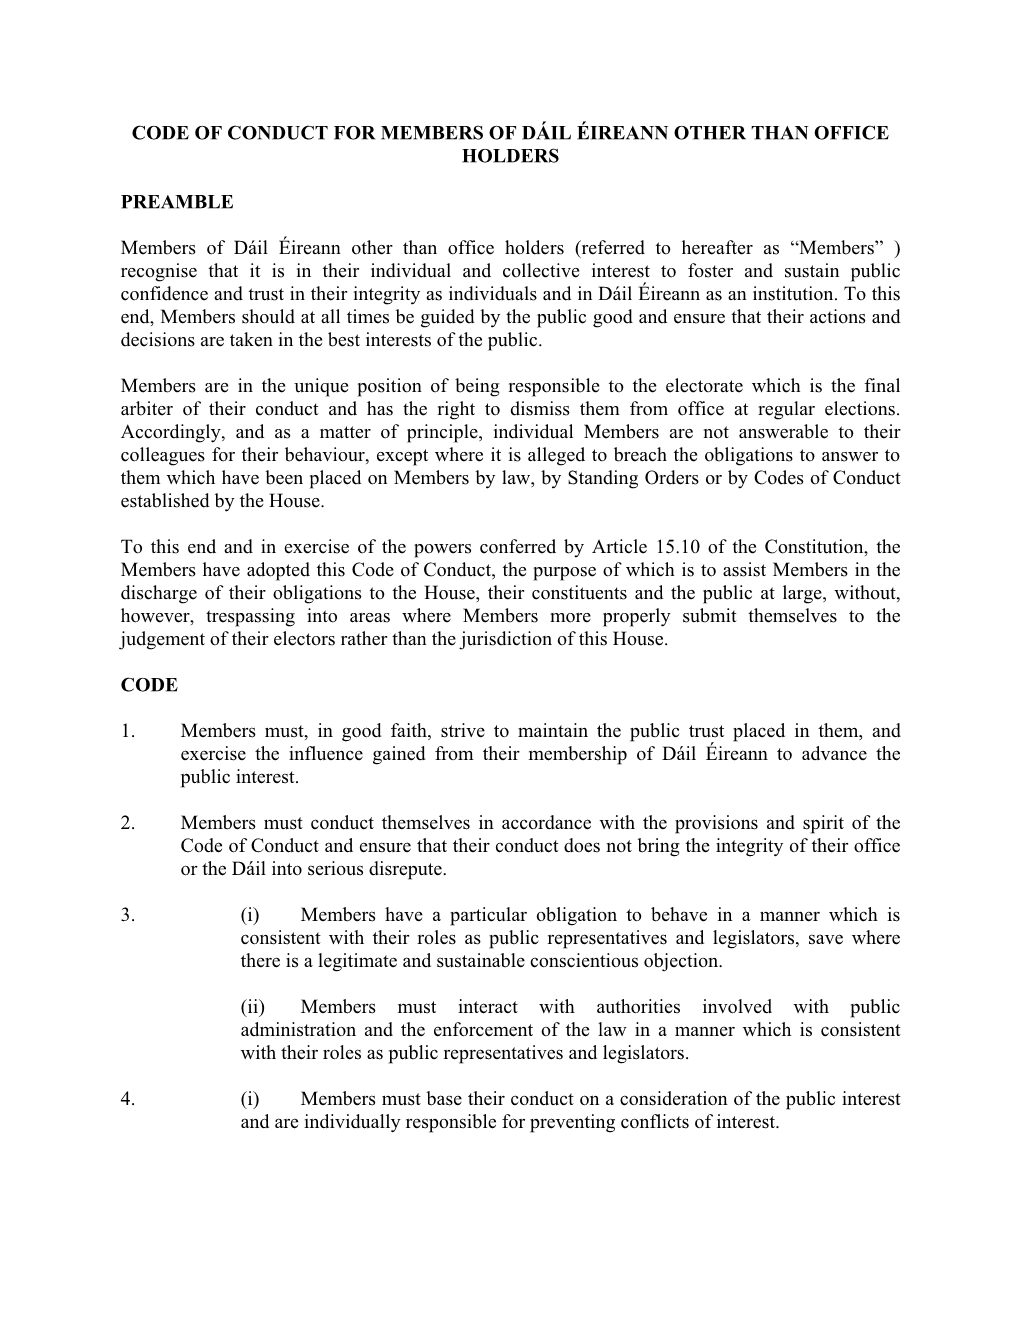 Code of Conduct for Members of Dáil Éireann Other Than Office Holders